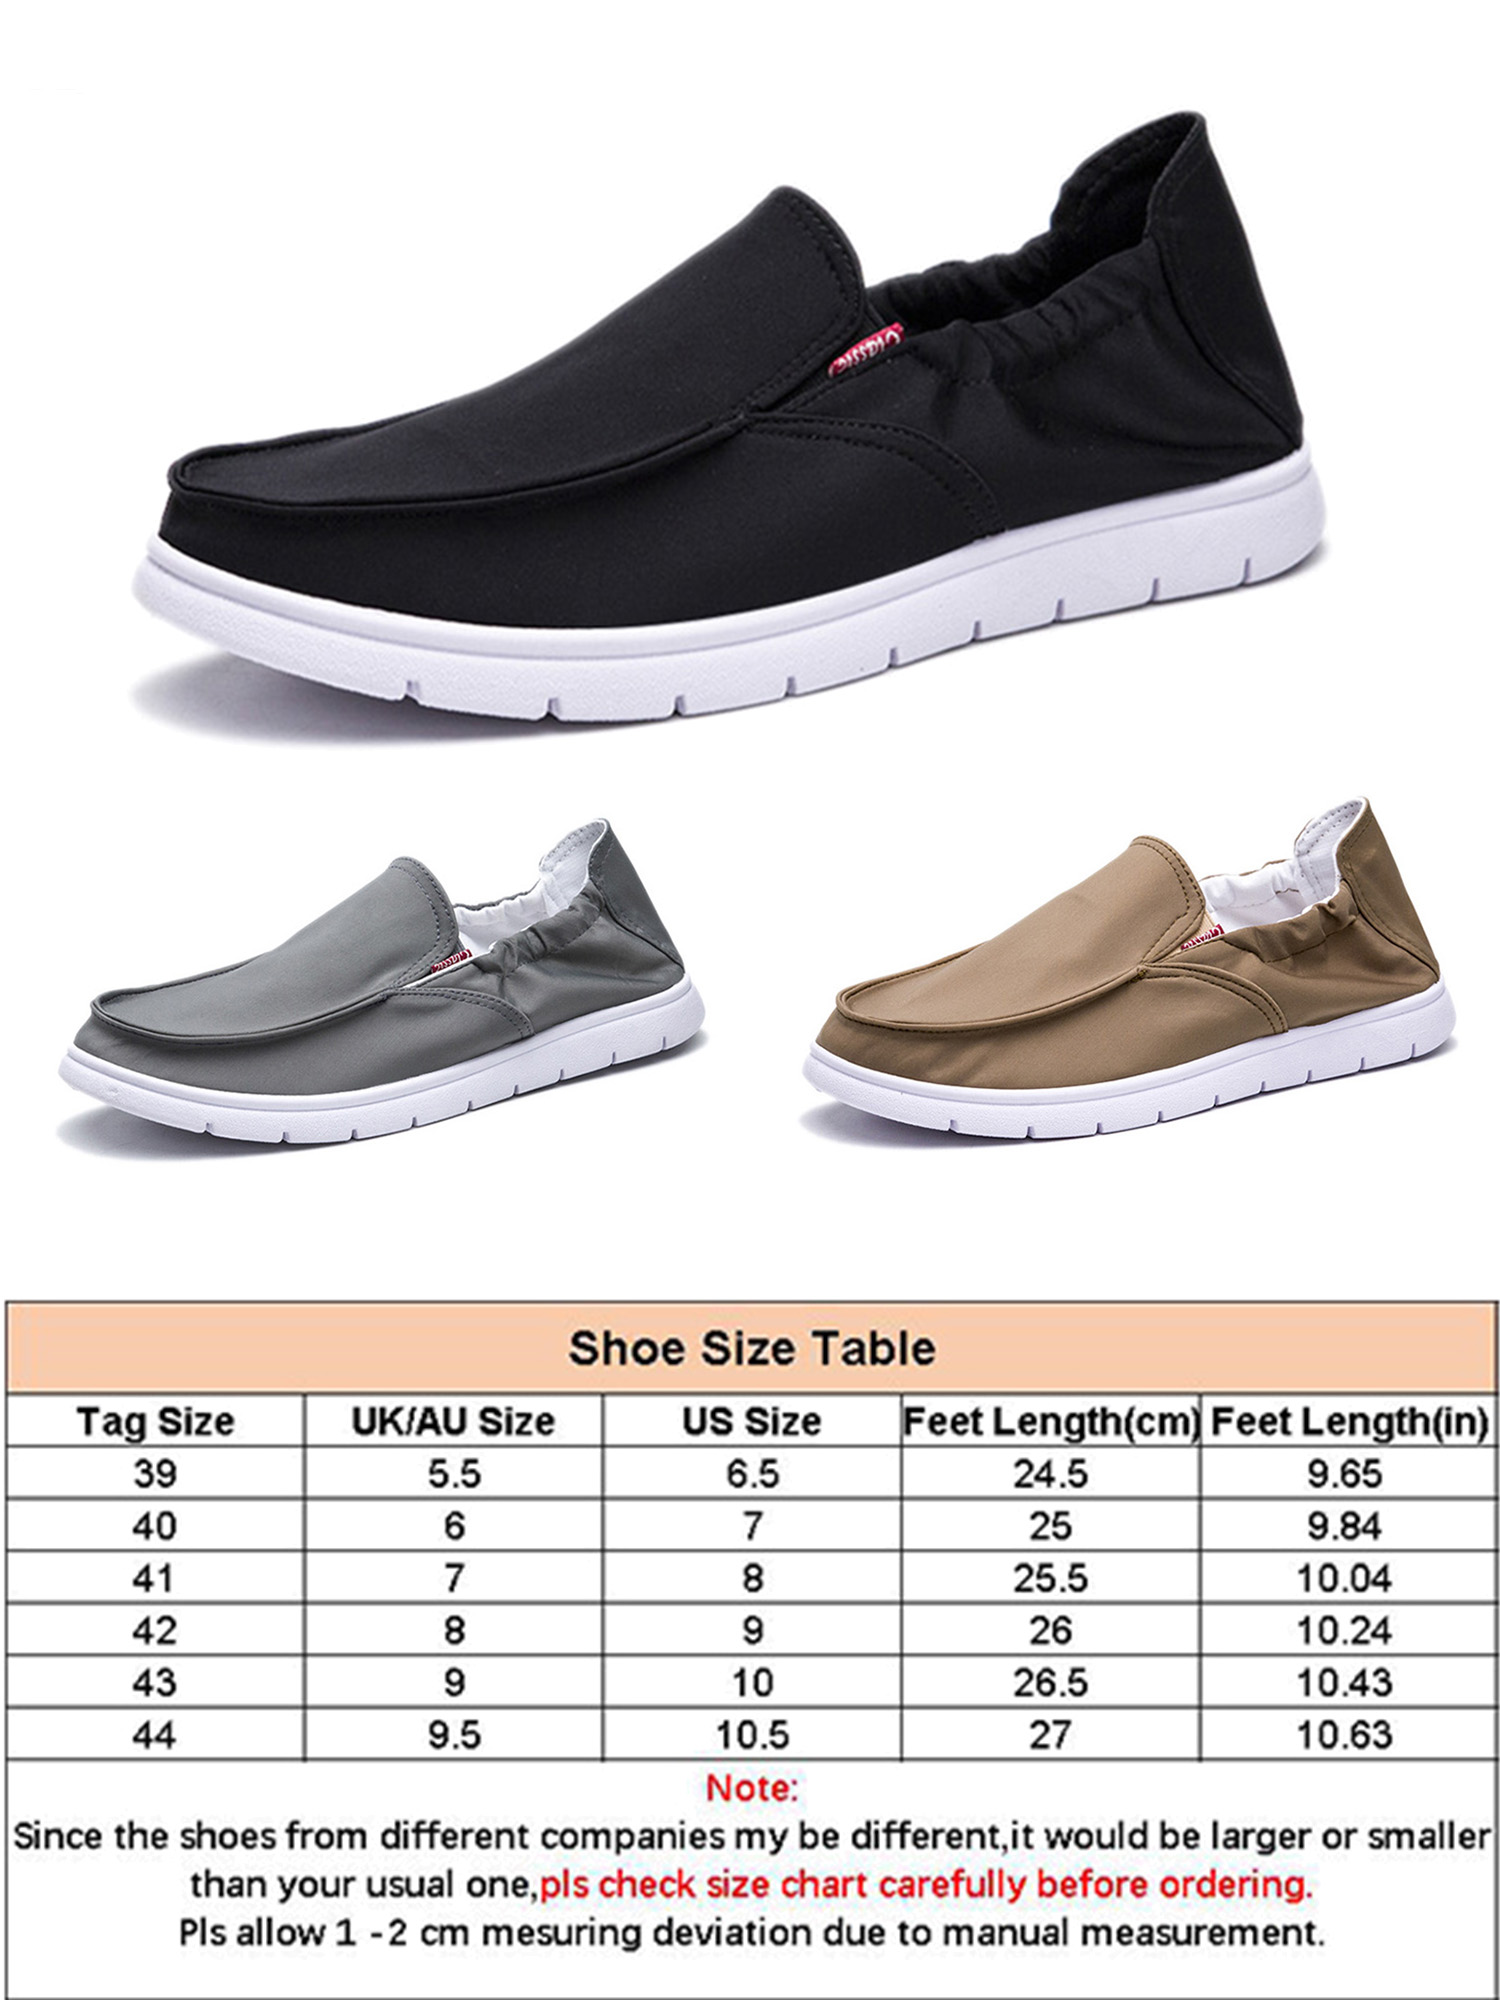 LUXUR Casual Canvas Shoes for Men Slip On Loafers Deck Shoes Comfortable Boat Shoes Outdoor Fashion - image 2 of 5